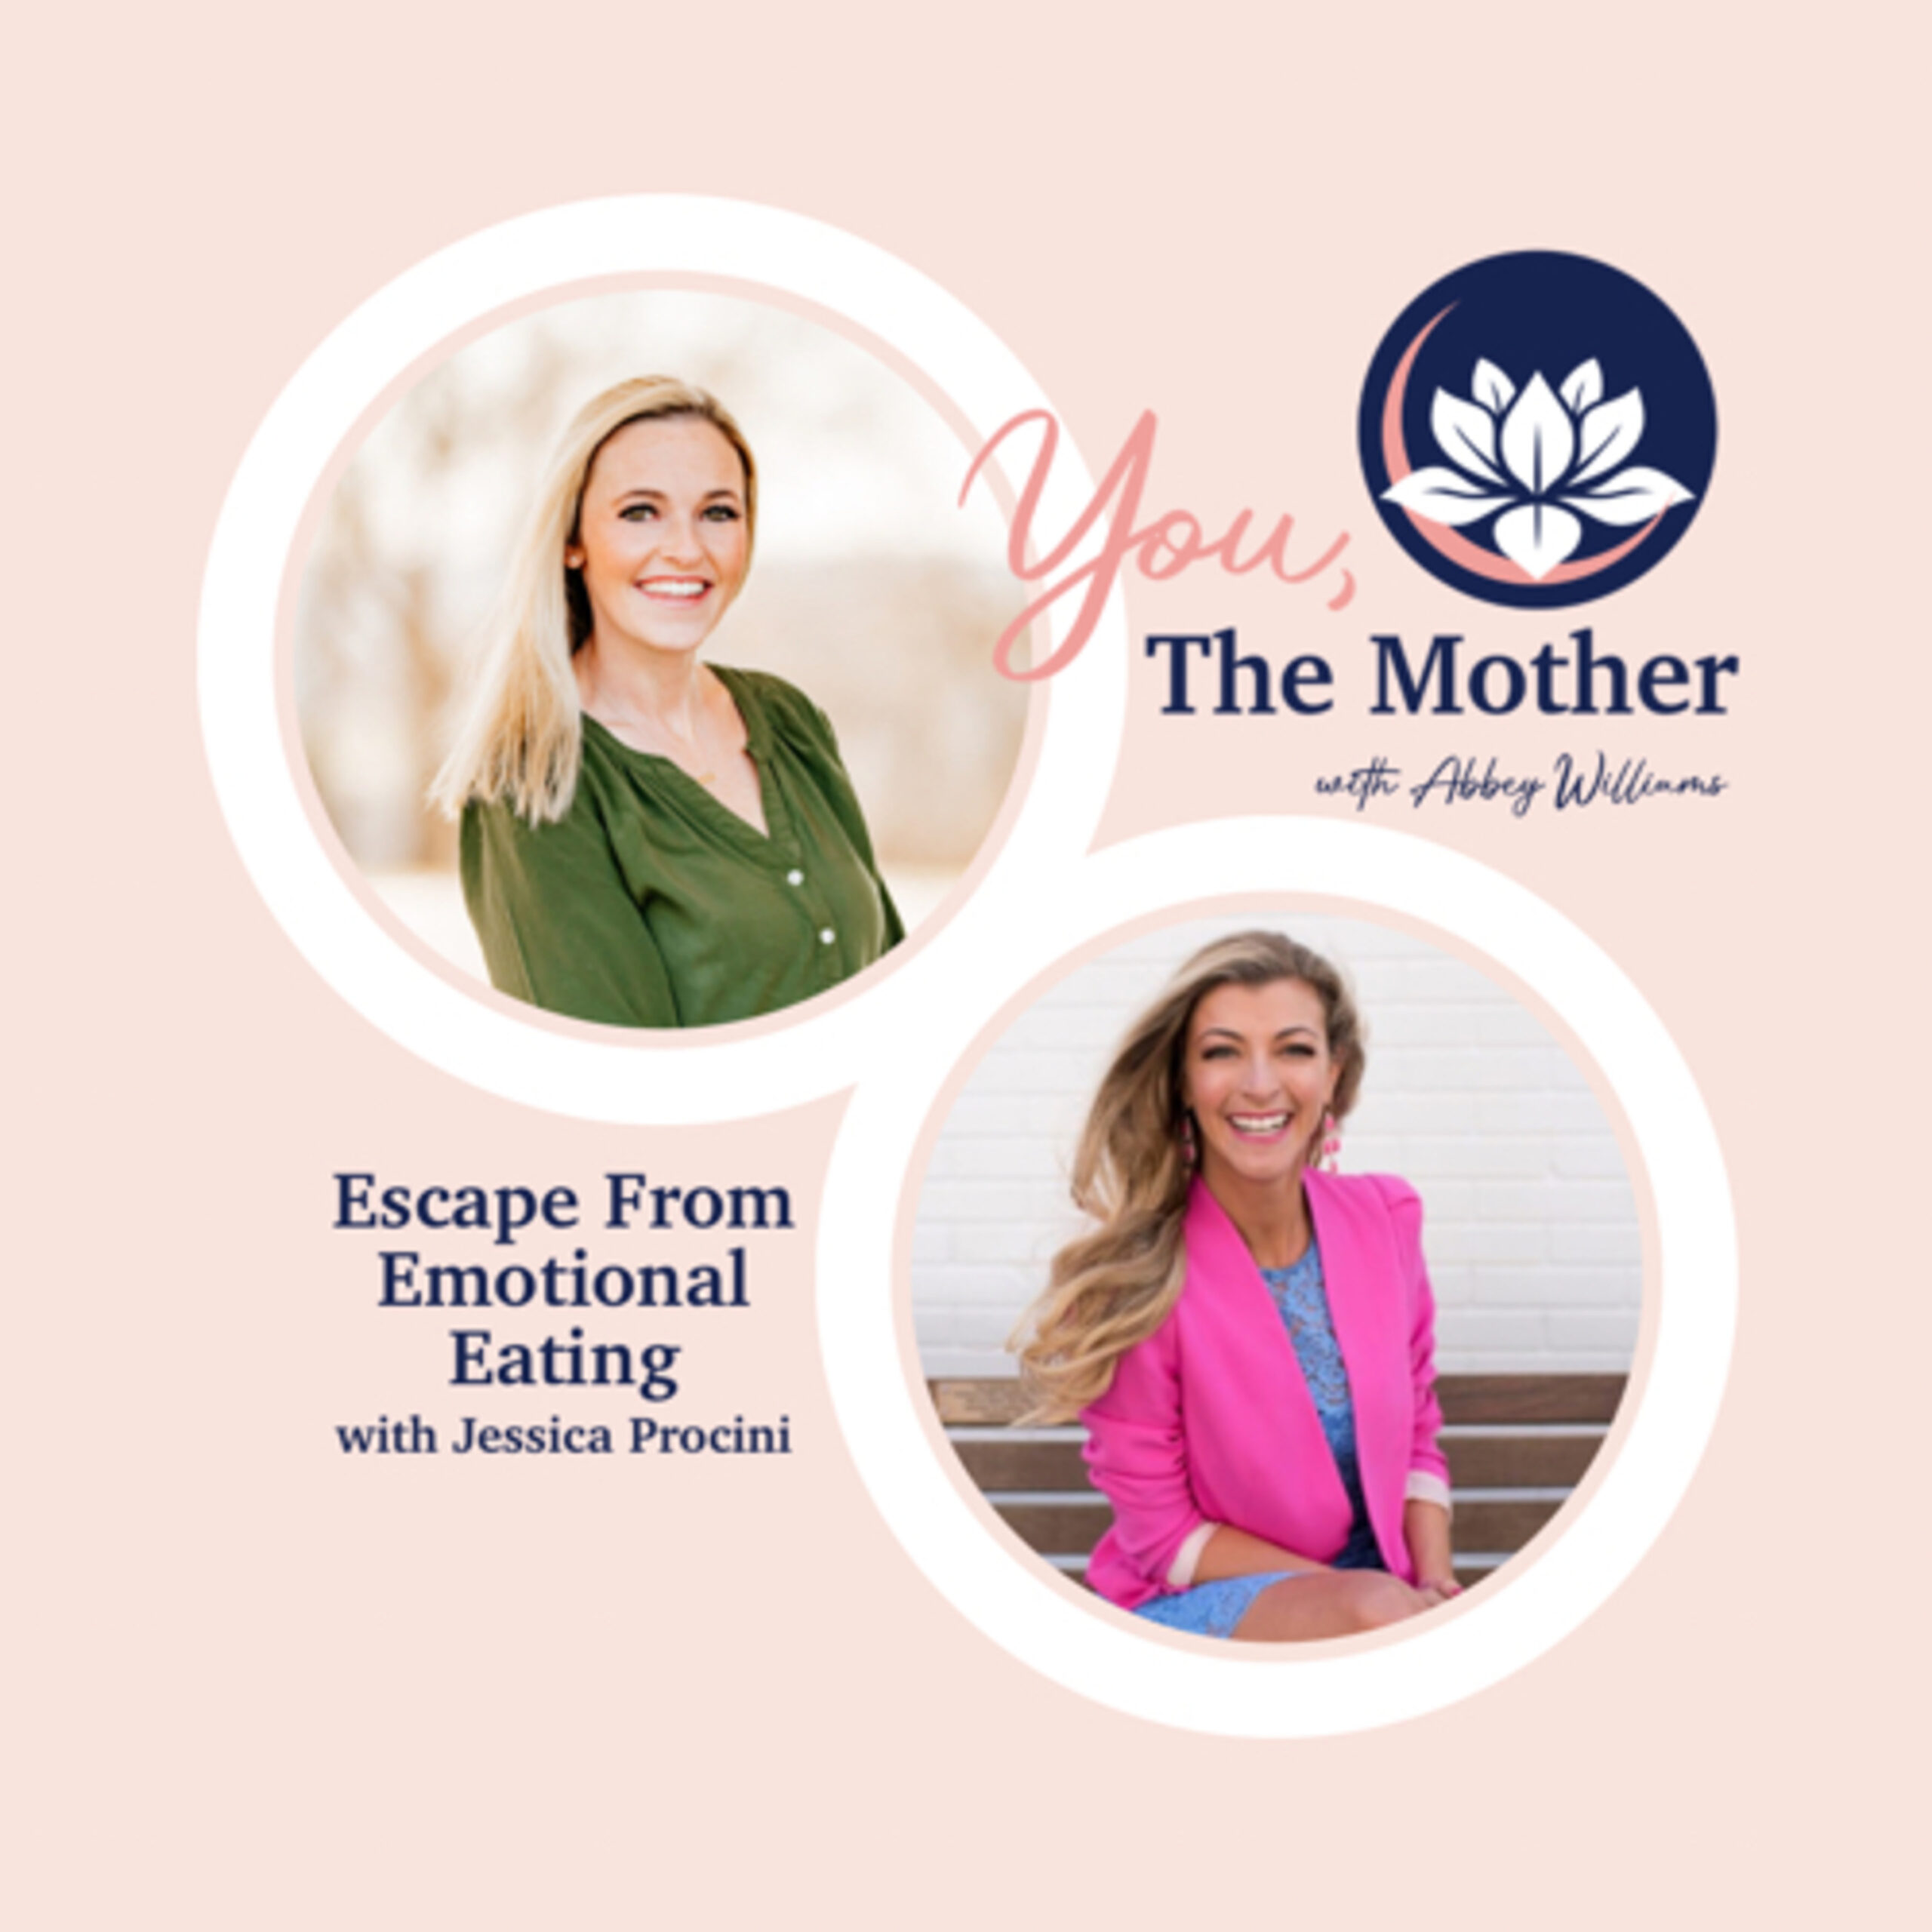 Escape From Emotional Eating with Jessica Procini